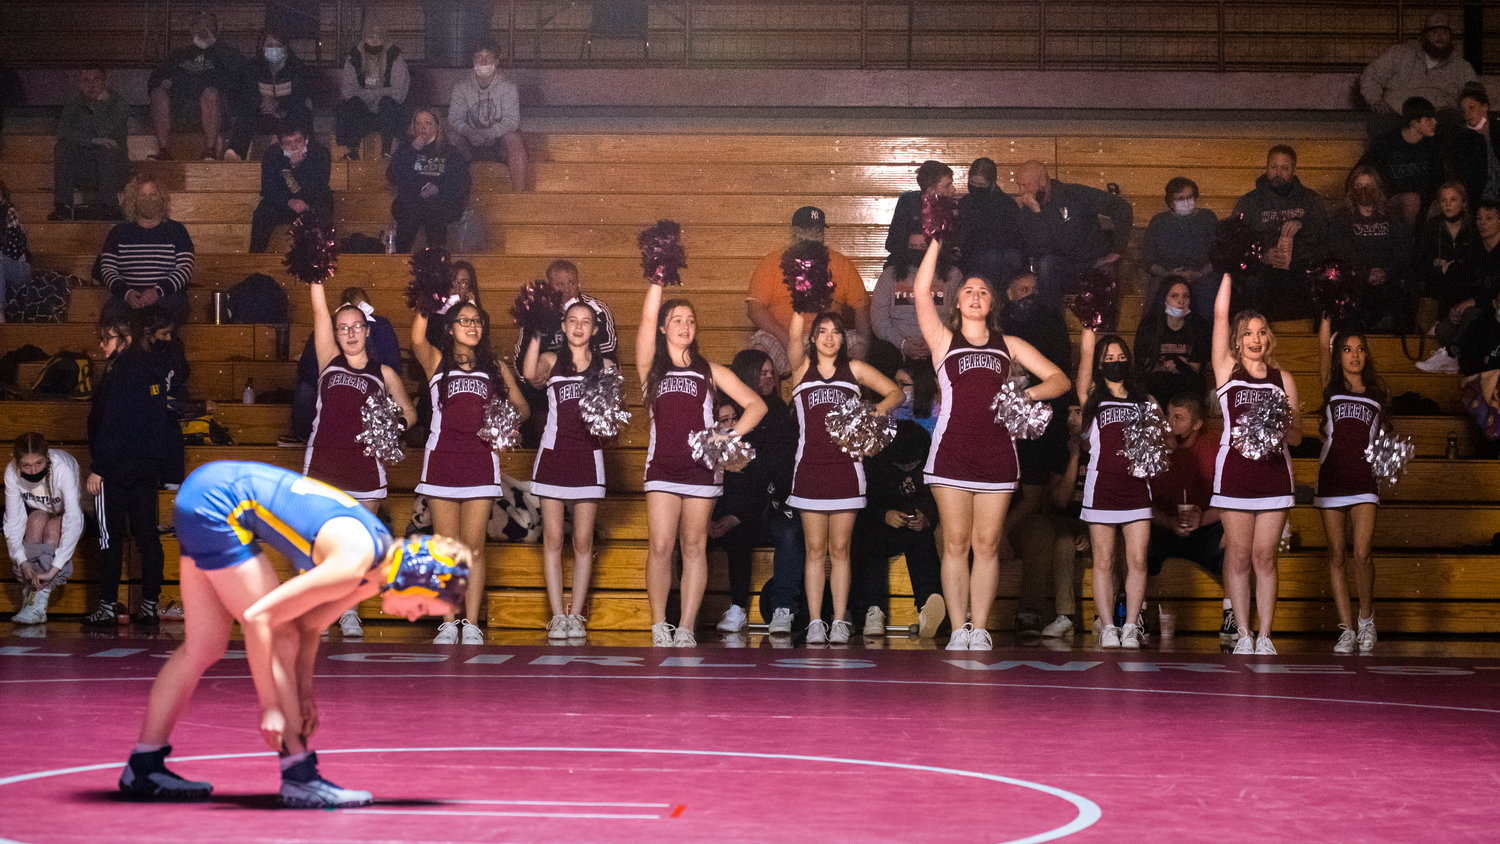 Bearcat cheerleaders raise their pom-poms as they cheer on wrestlers Thursday night at W.F. West High School.